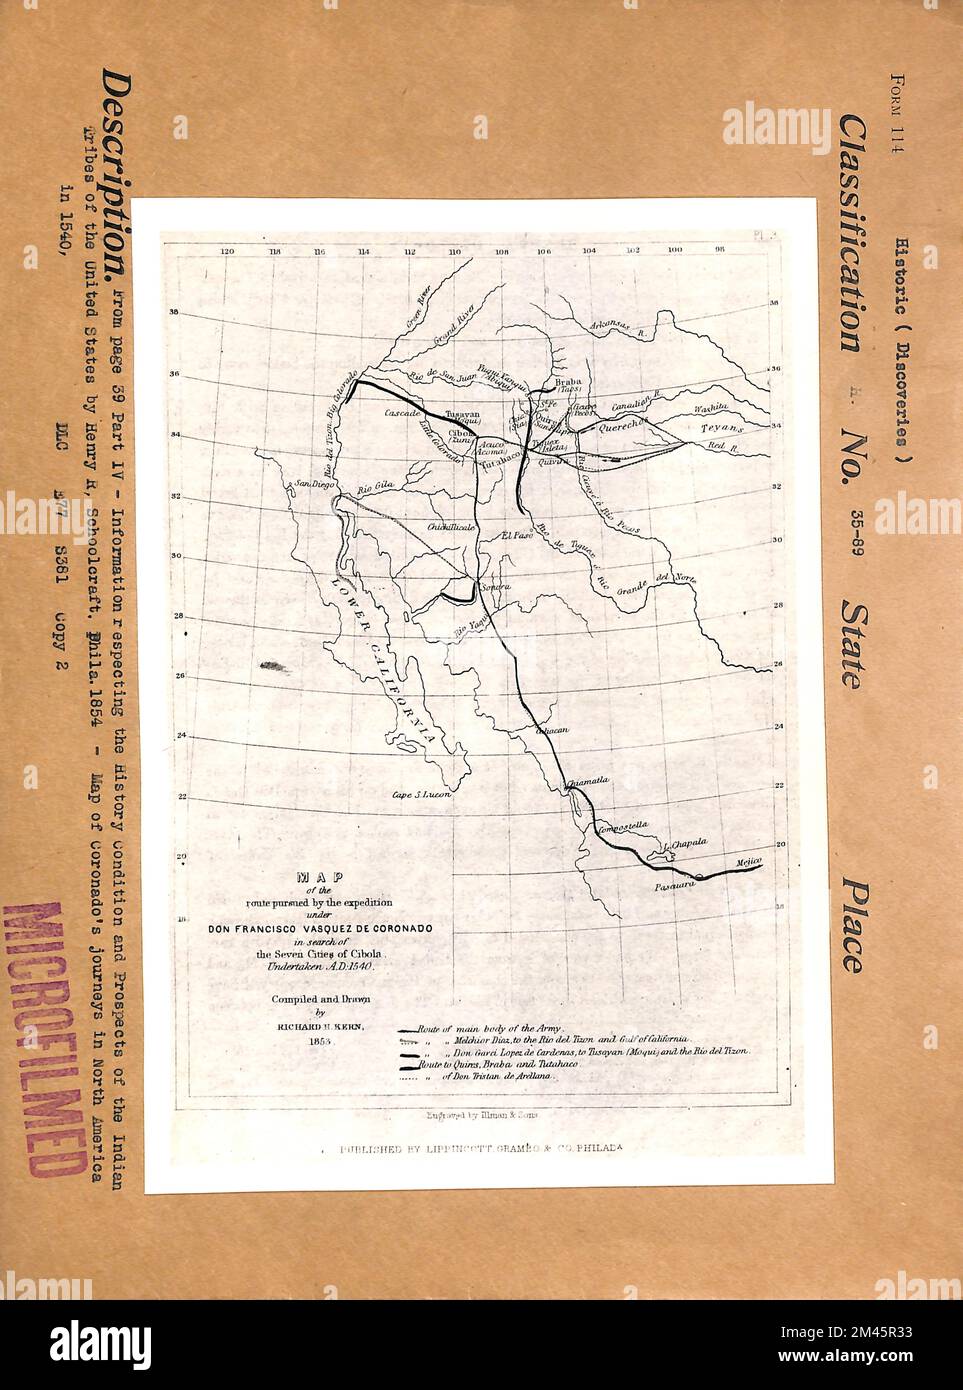 Map of the Route Pursued By the Expedition Under Don Francisco Vasquez De Coronado in Search of the Seven Cities of Cibola, Undertaken A. D. 1540, Compiled and Drawn By Richard H. Kern, 1853. Original caption: From page 39 Part IV - Information respecting the History Condition and Prospects of the Indian Tribes of the United States by Henry R. Schoolcraft. Phila. 1854 - Map of Coronado's journeys in North America in 1540. DLC E77 S381 Copy 2. Stock Photo